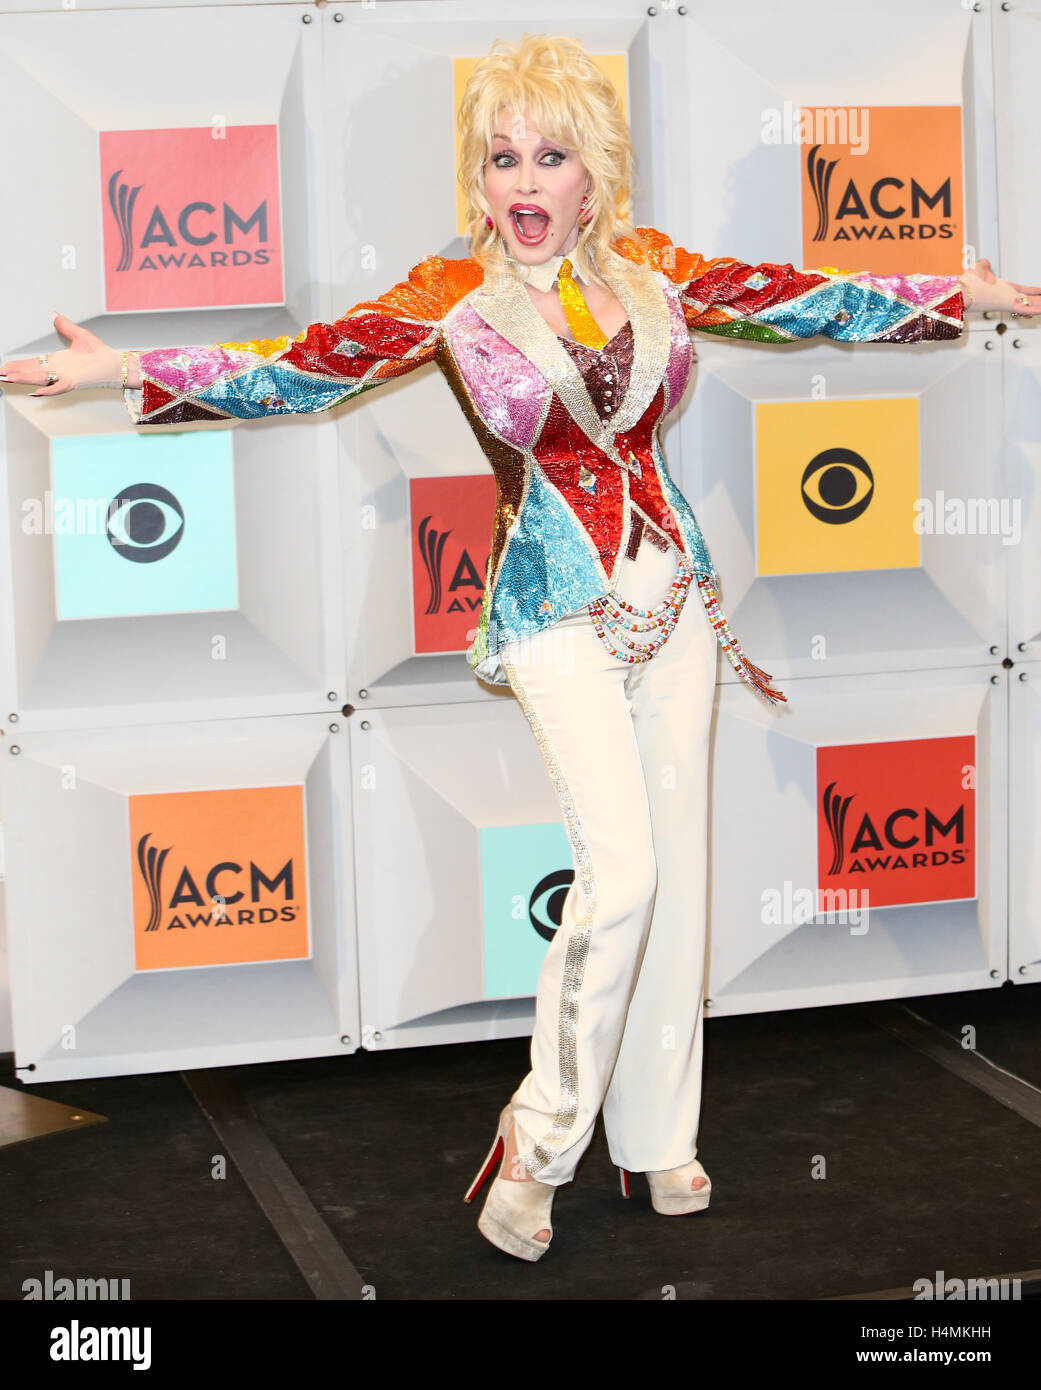 Singer-songwriter and producer Dolly Parton, winner of the Tex Ritter Award for 'Dolly Parton's Coat of Many Colors,' poses in the press room during the 51st Academy of Country Music Awards at MGM Grand Garden Arena on April 3, 2016 in Las Vegas, Nevada. Stock Photo